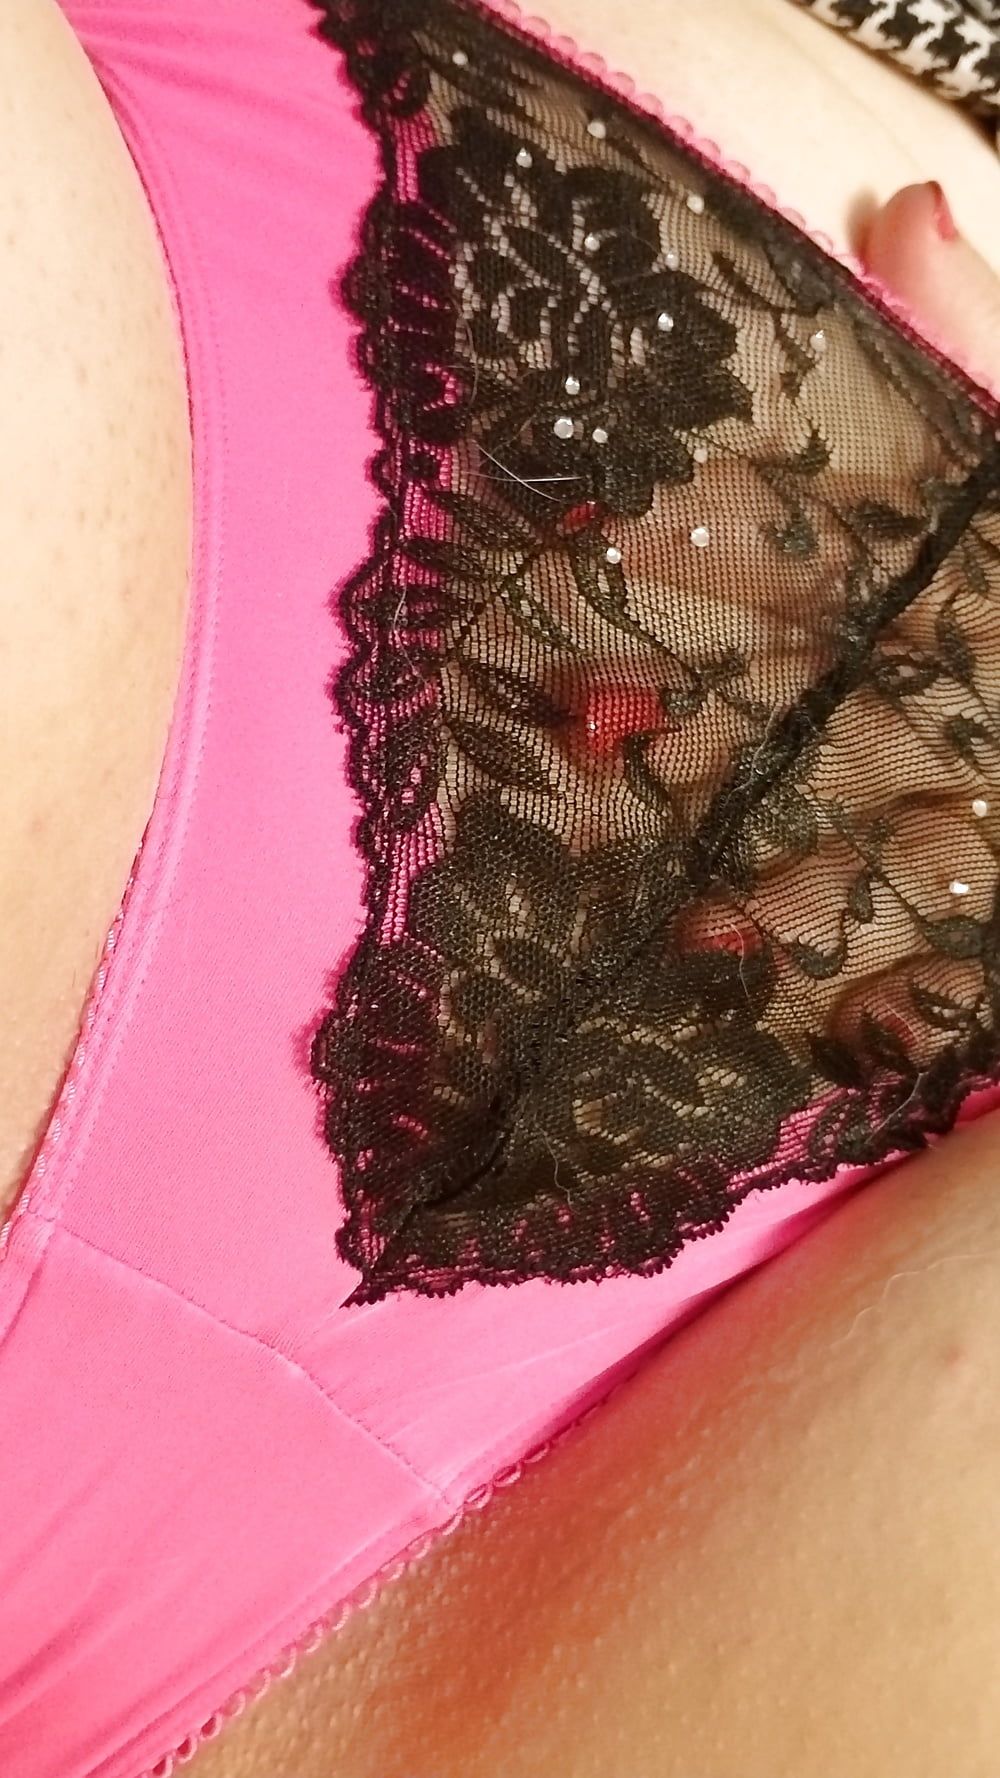 Pantie and ass photos will be added to over time milf wife #9